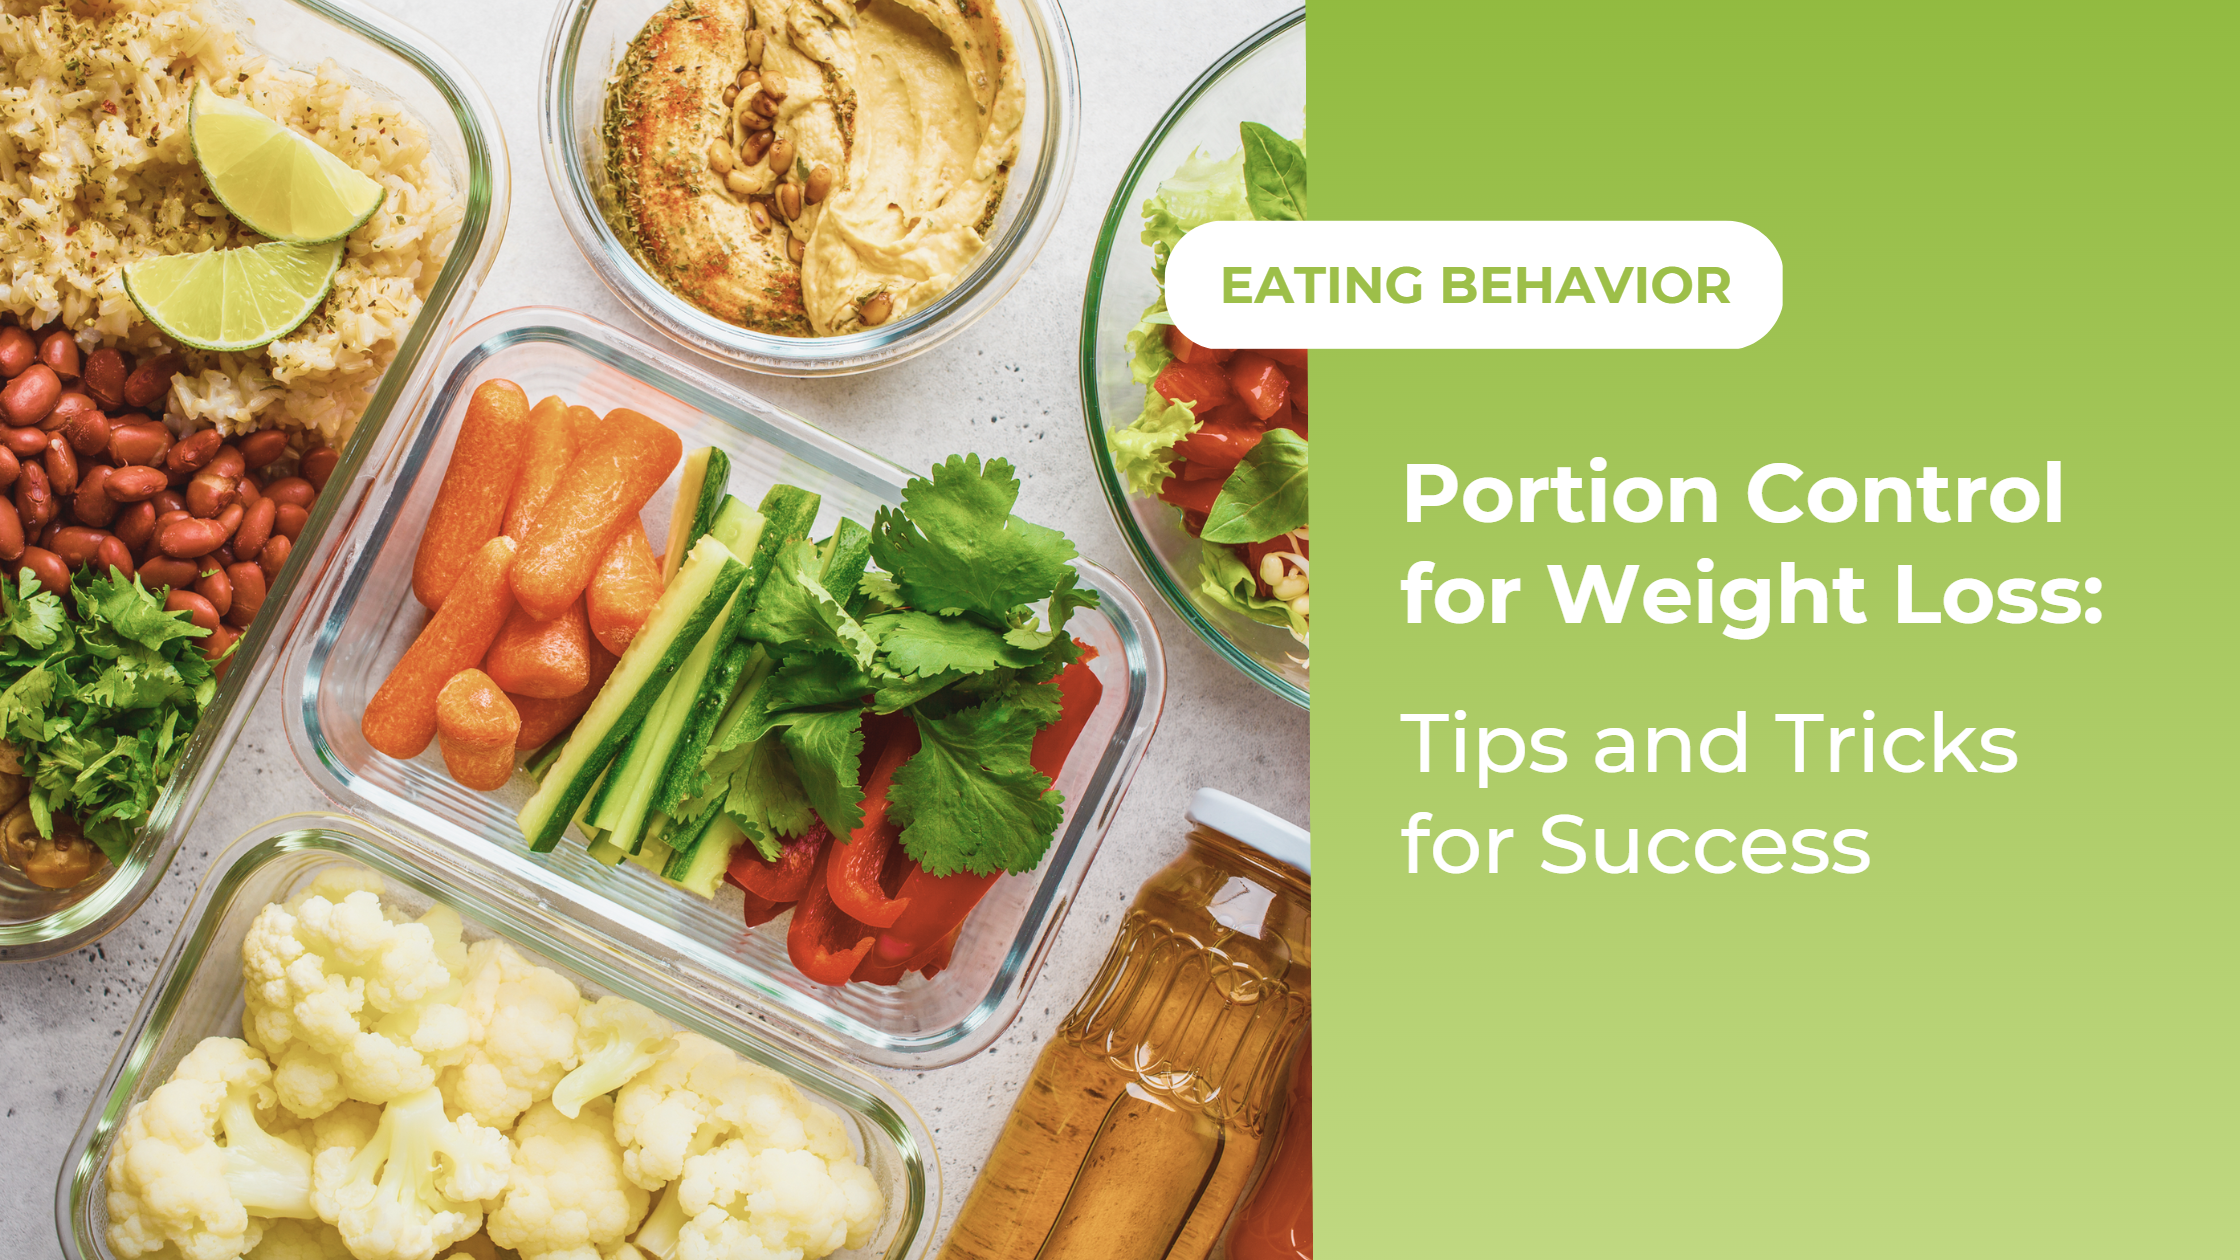 Portion Control Tips for Weight Loss From a Registered Dietitian